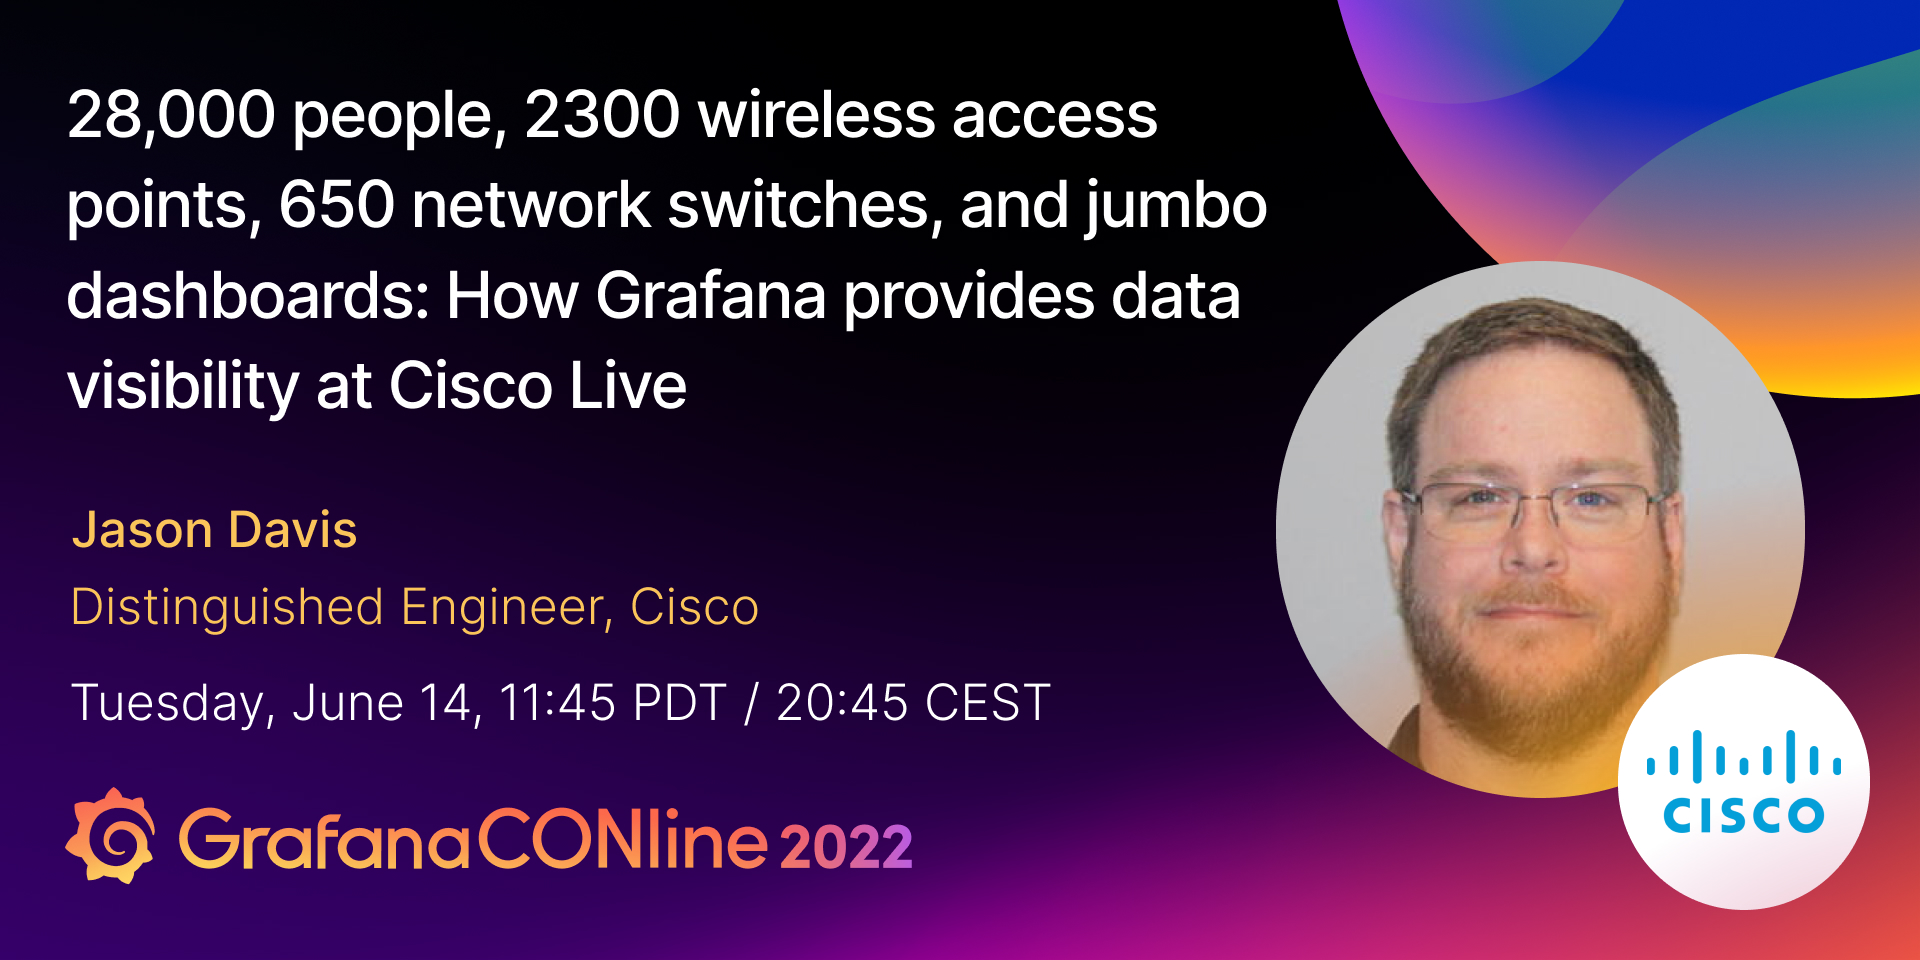 28,000 people, 2300 wireless access points, 650 network switches, and jumbo dashboards: How Grafana provides data visibility at Cisco Live